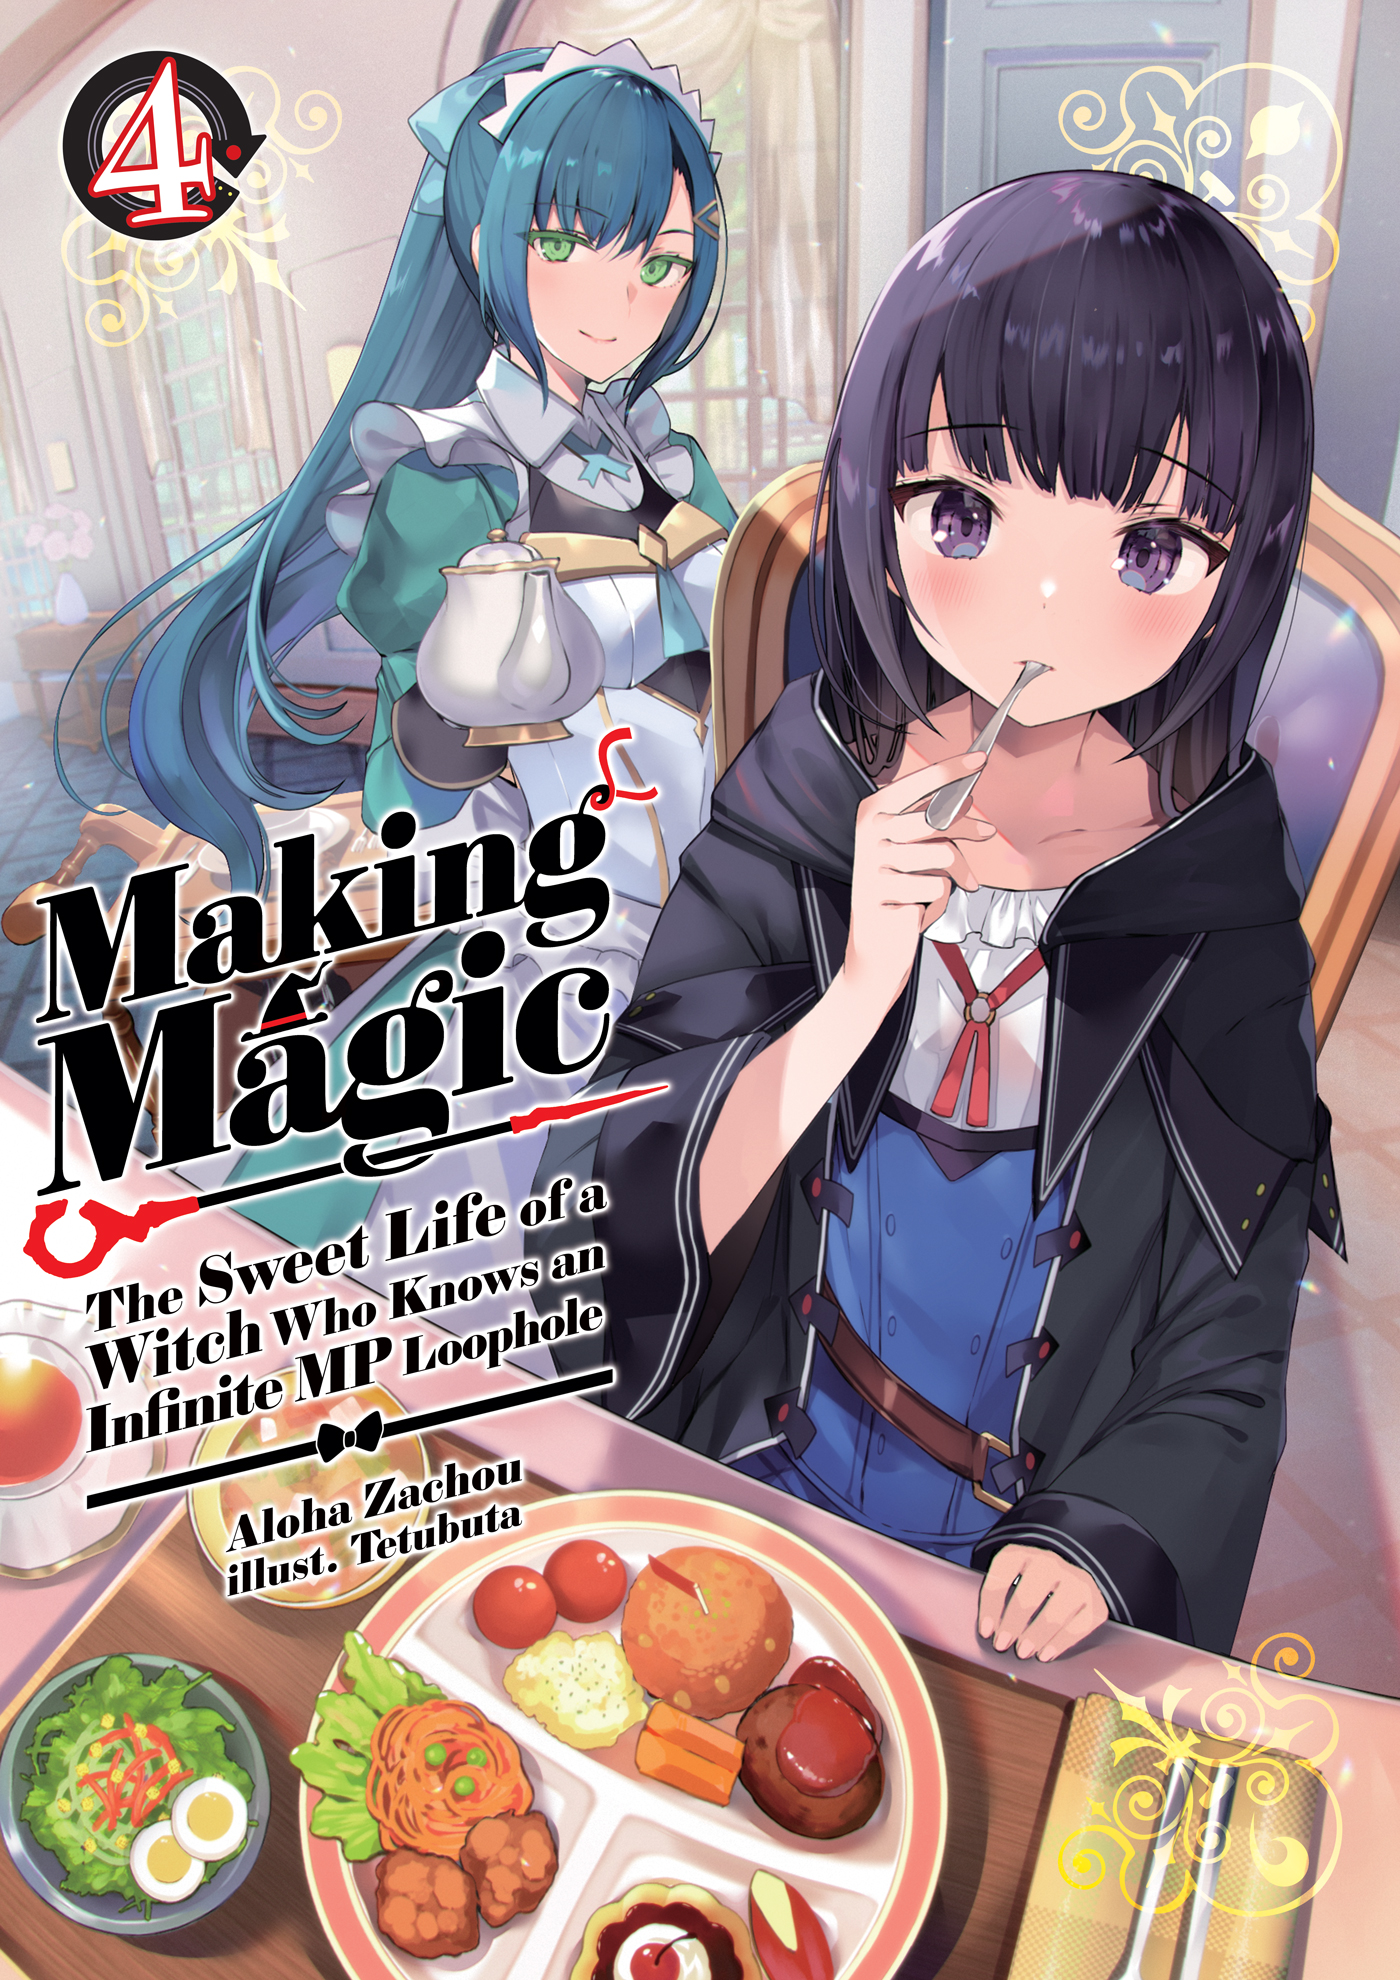 Making Magic: The Sweet Life of a Witch Who Knows an Infinite MP Loophole #004